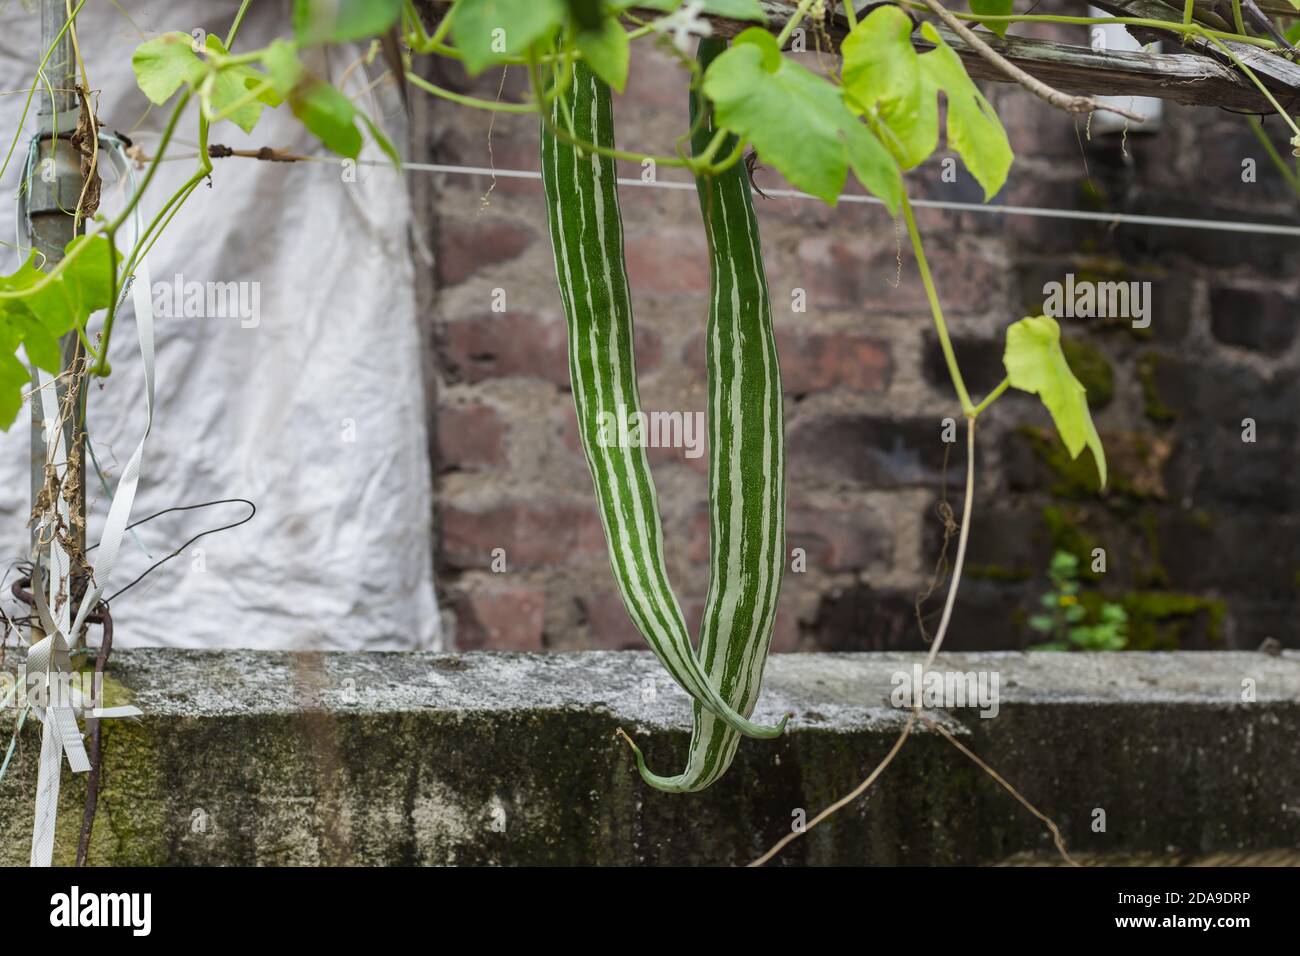 organic green snake gourd vegetable in home garden in india hanging from vine.This vegetable is widely used in asian cuisine. natural outdoor shot. Stock Photo